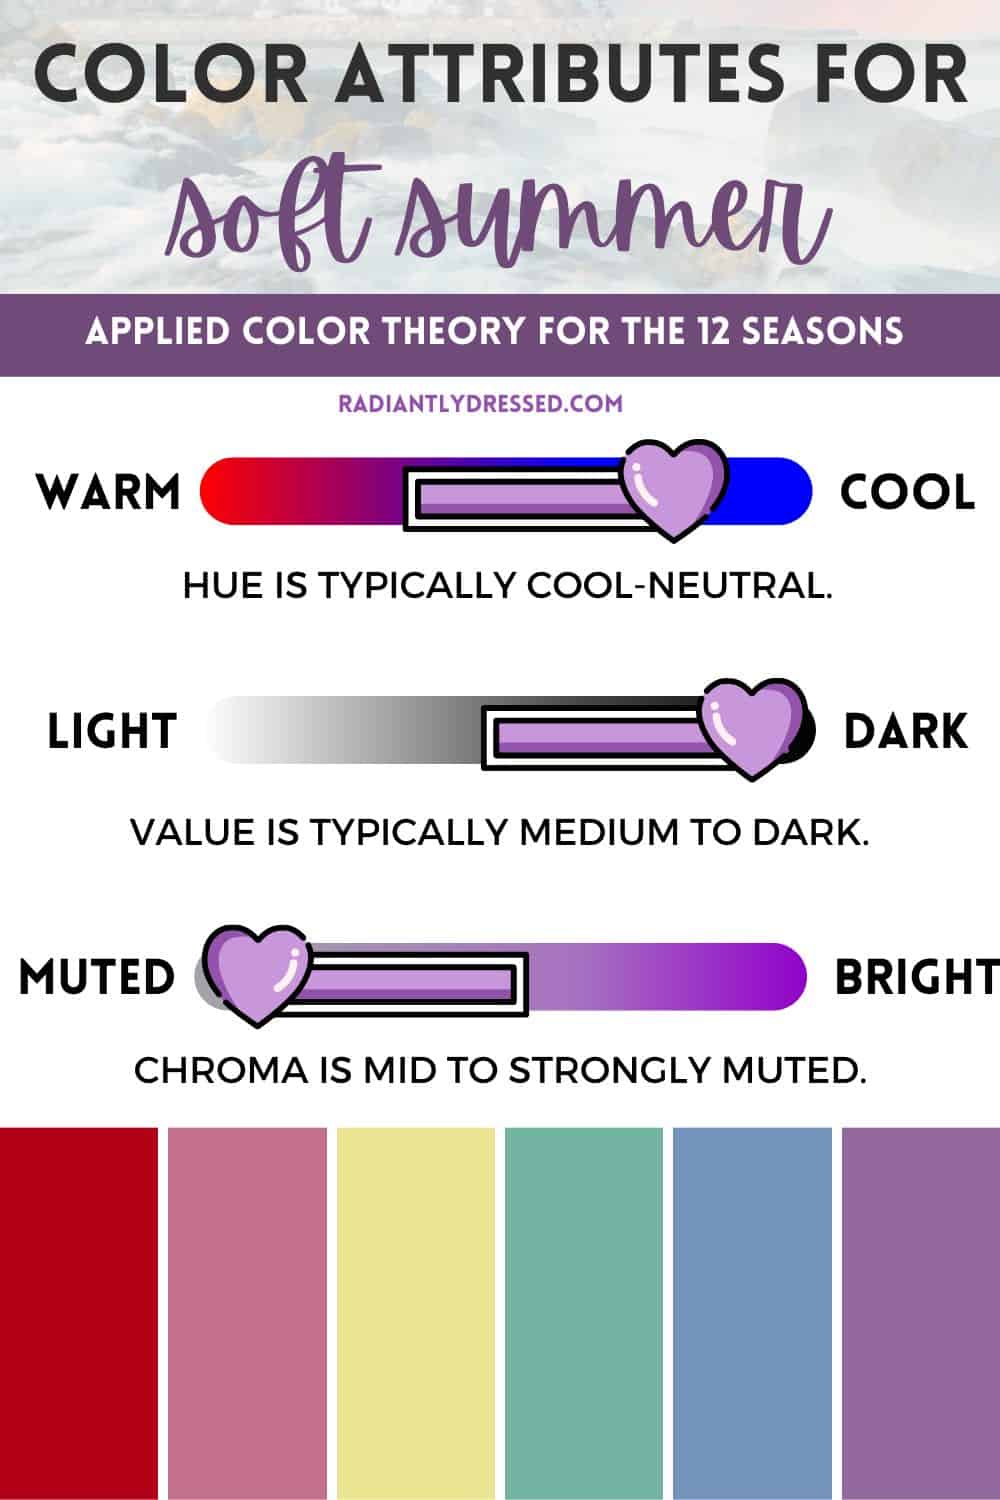 soft summer color theory attributes